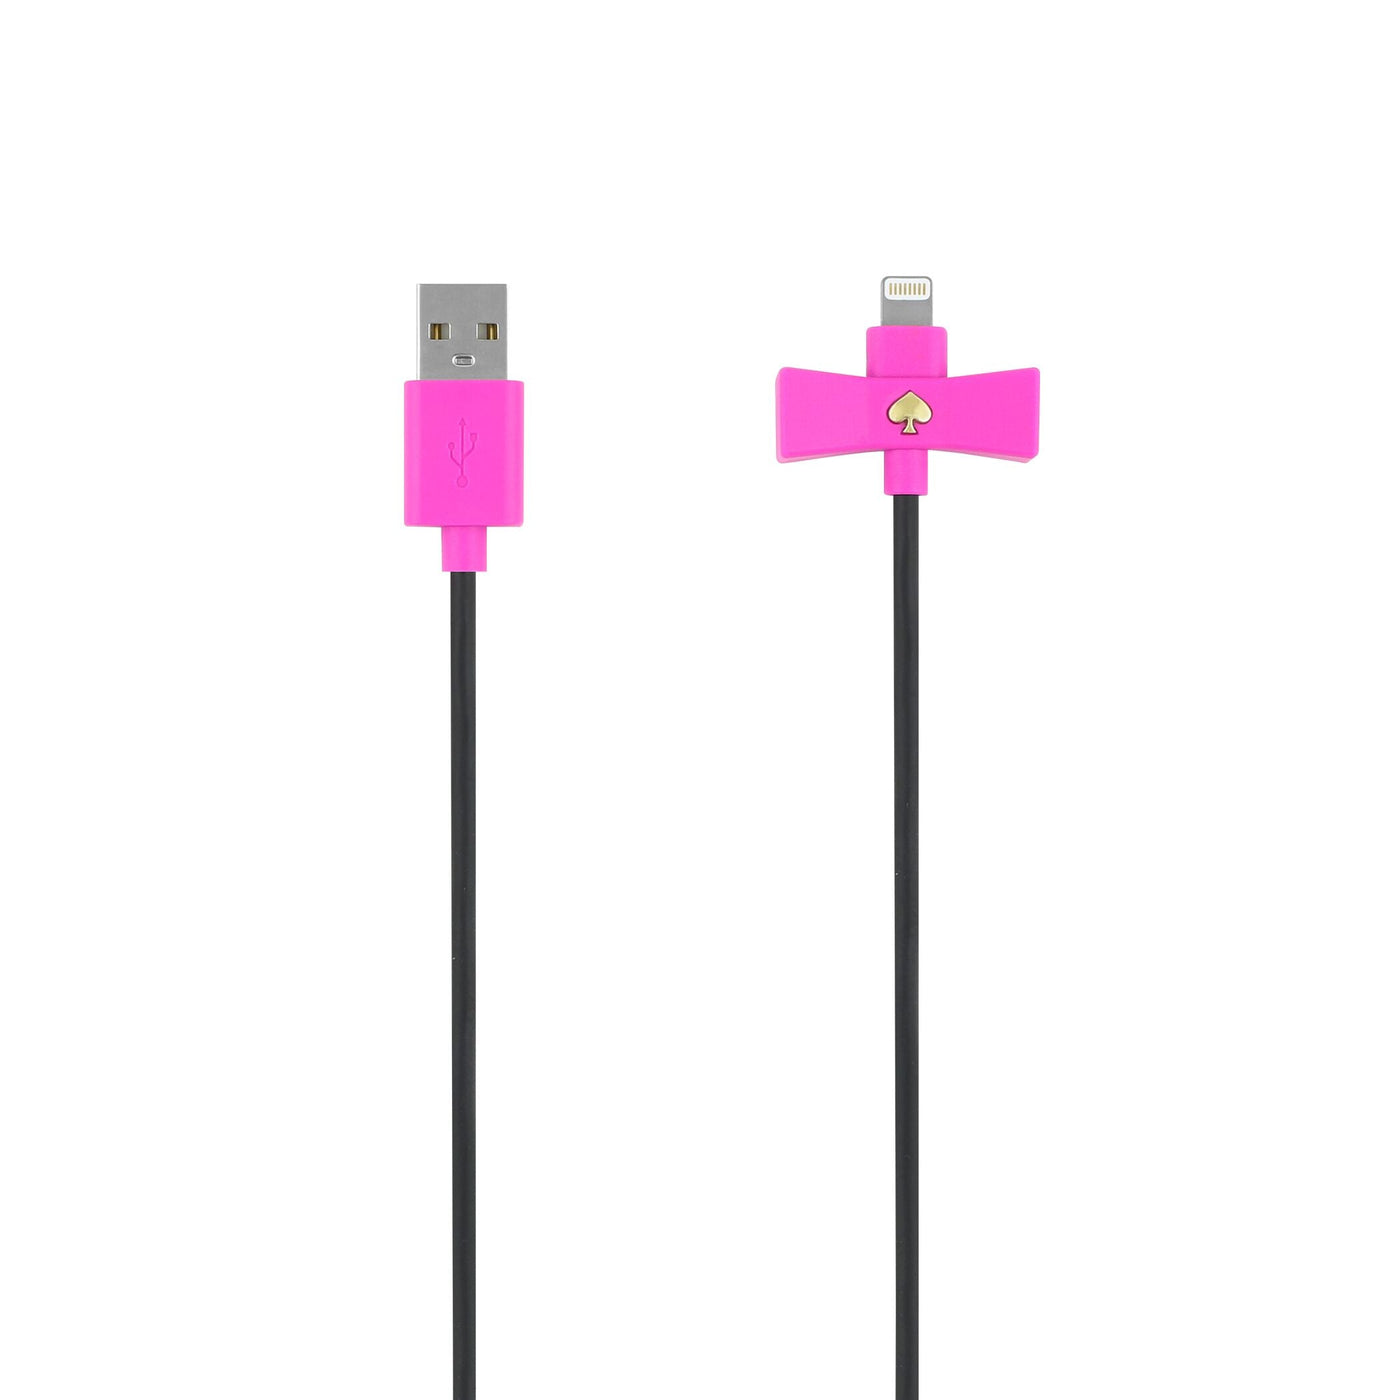 kate spade new york - Bow Charge/Sync Cable - Captive Lightning - Black Bow/Vivid Snapdragon Cable / ケーブル - FOX STORE